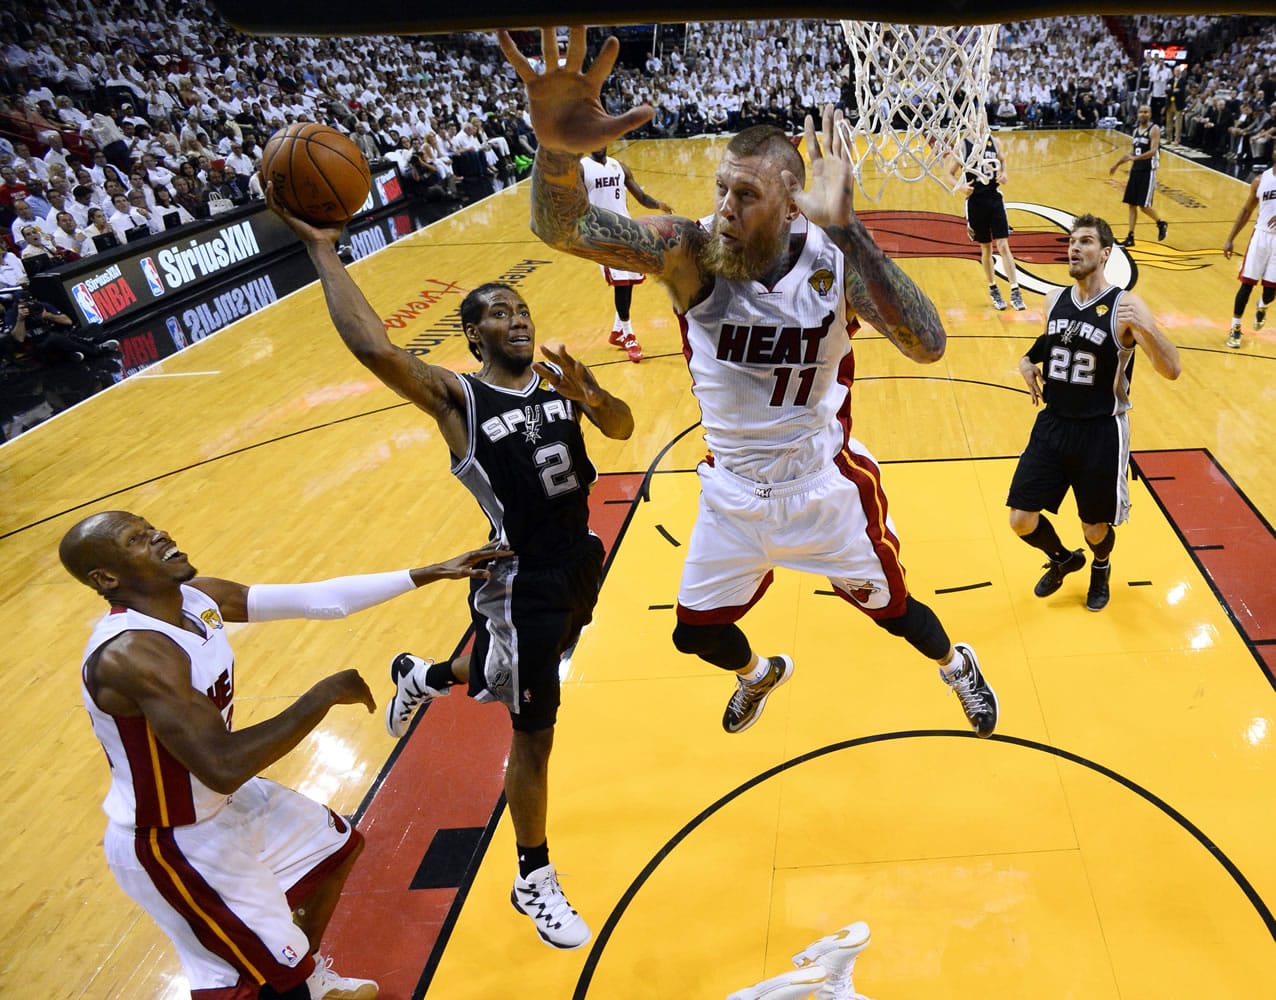 San Antonio Spurs forward Kawhi Leonard (2) goes to the basket as Miami Heat forward Chris Andersen (11) defends in the first half in Game 4 of the NBA basketball finals in Miami, Thursday, June 12, 2014. The Spurs won 107-86. (AP Photo/Larry W.